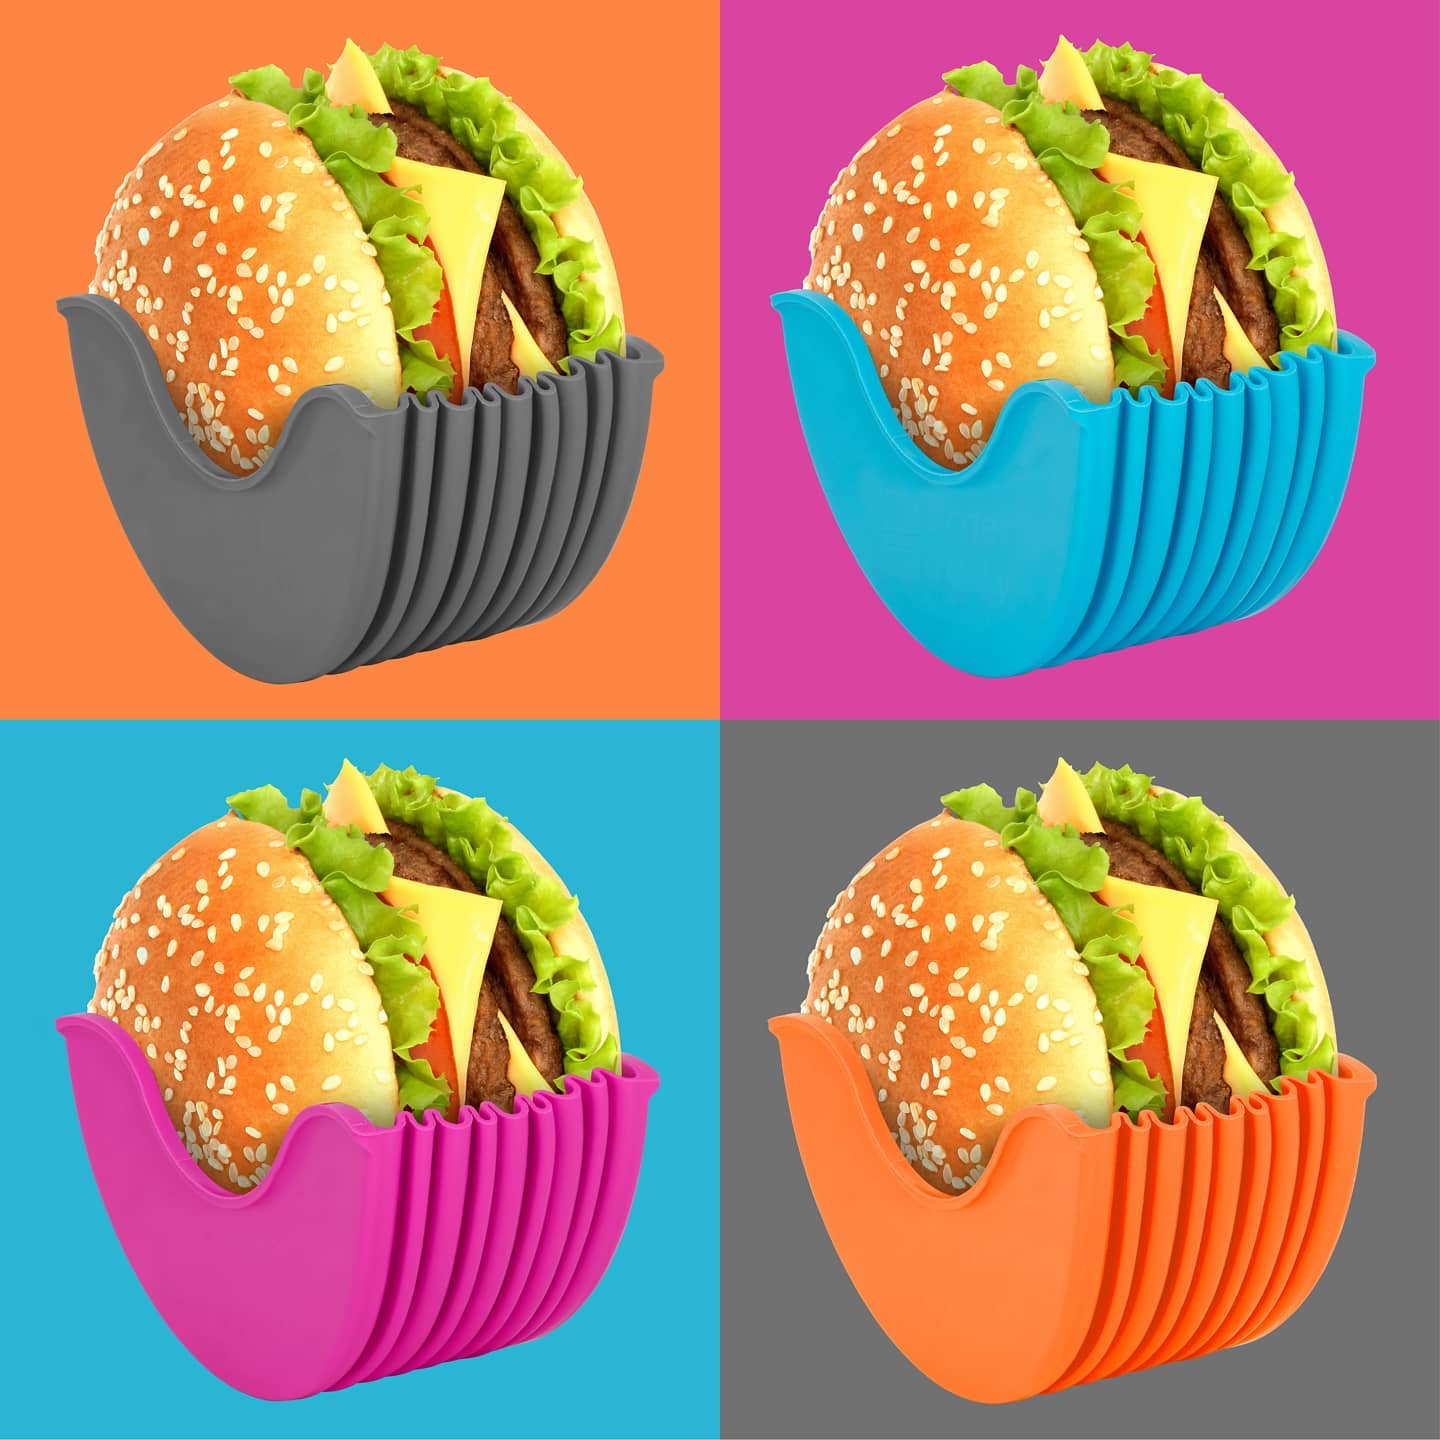 Burger Buddy Hamburger Holder - Silicone burger holder prevents juices and sauces from spilling